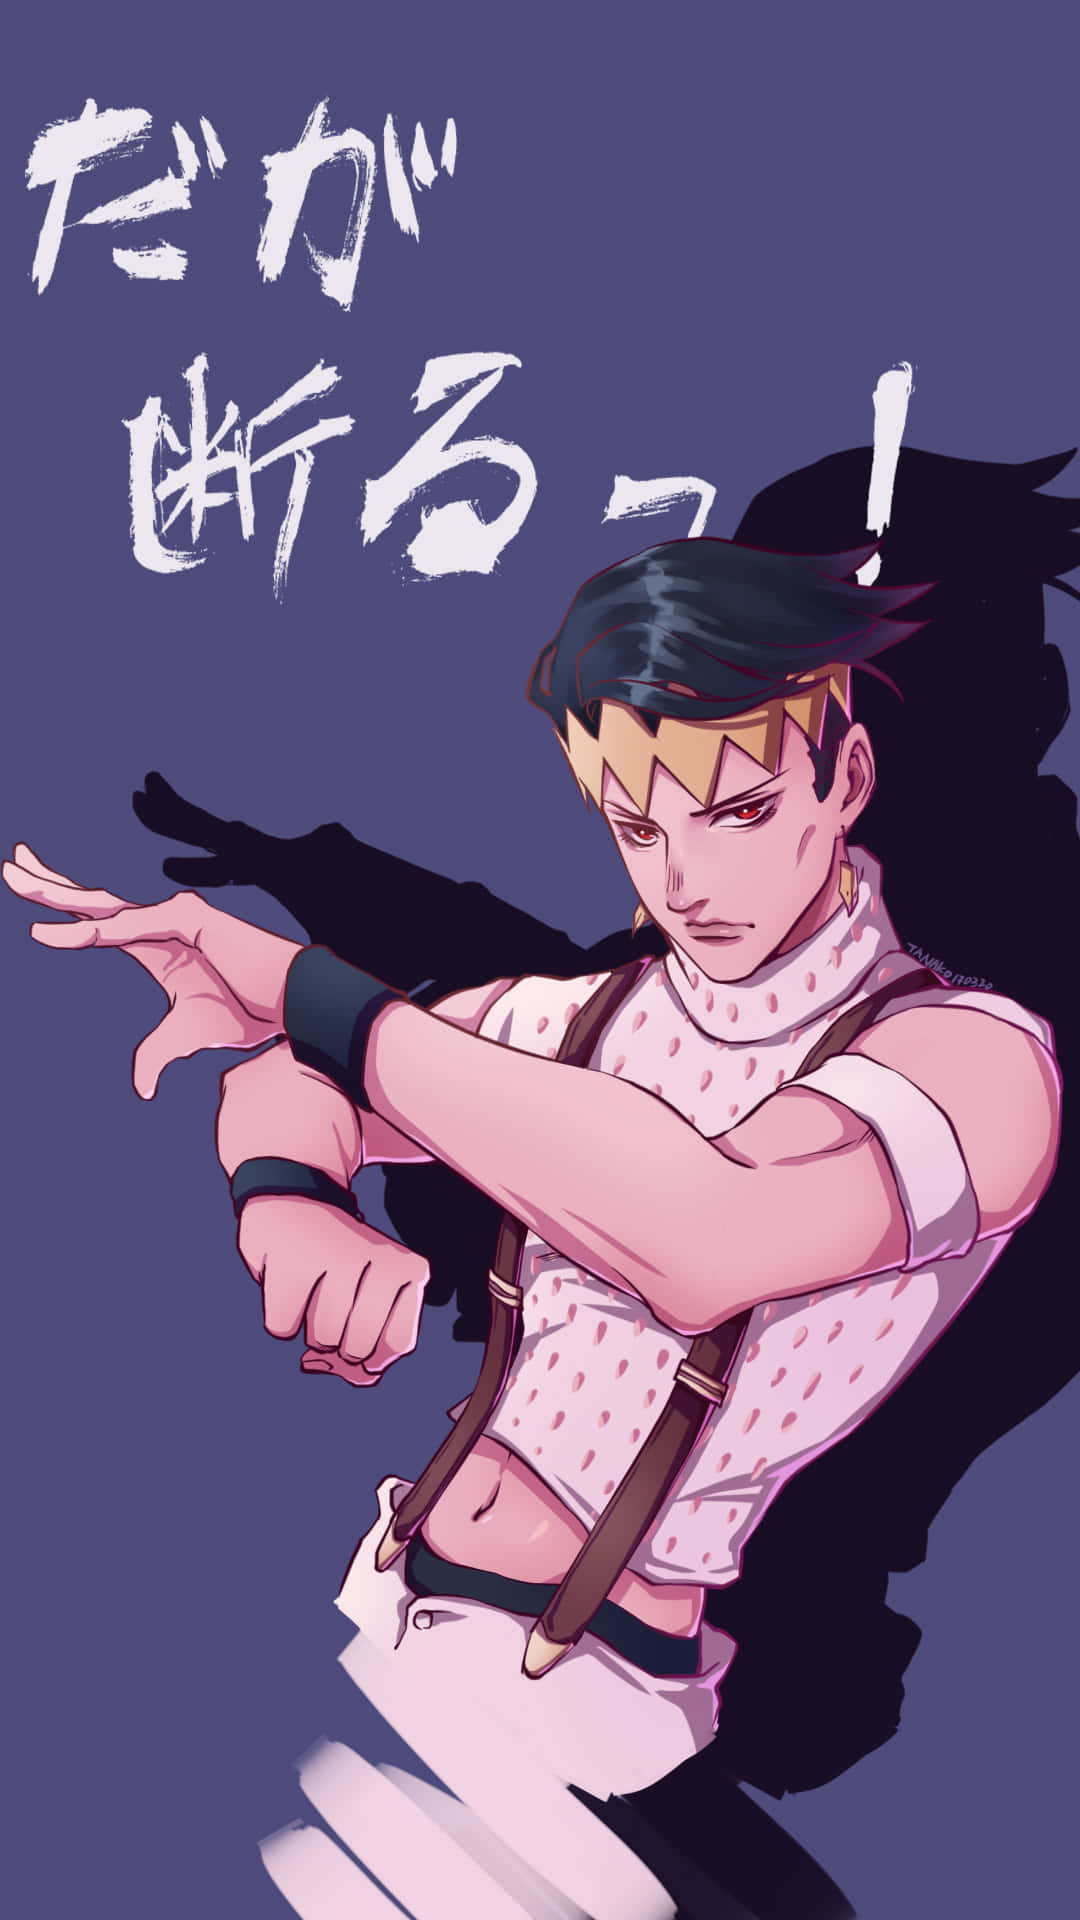 Caption: Rohan Kishibe striking a pose in his iconic outfit. Wallpaper